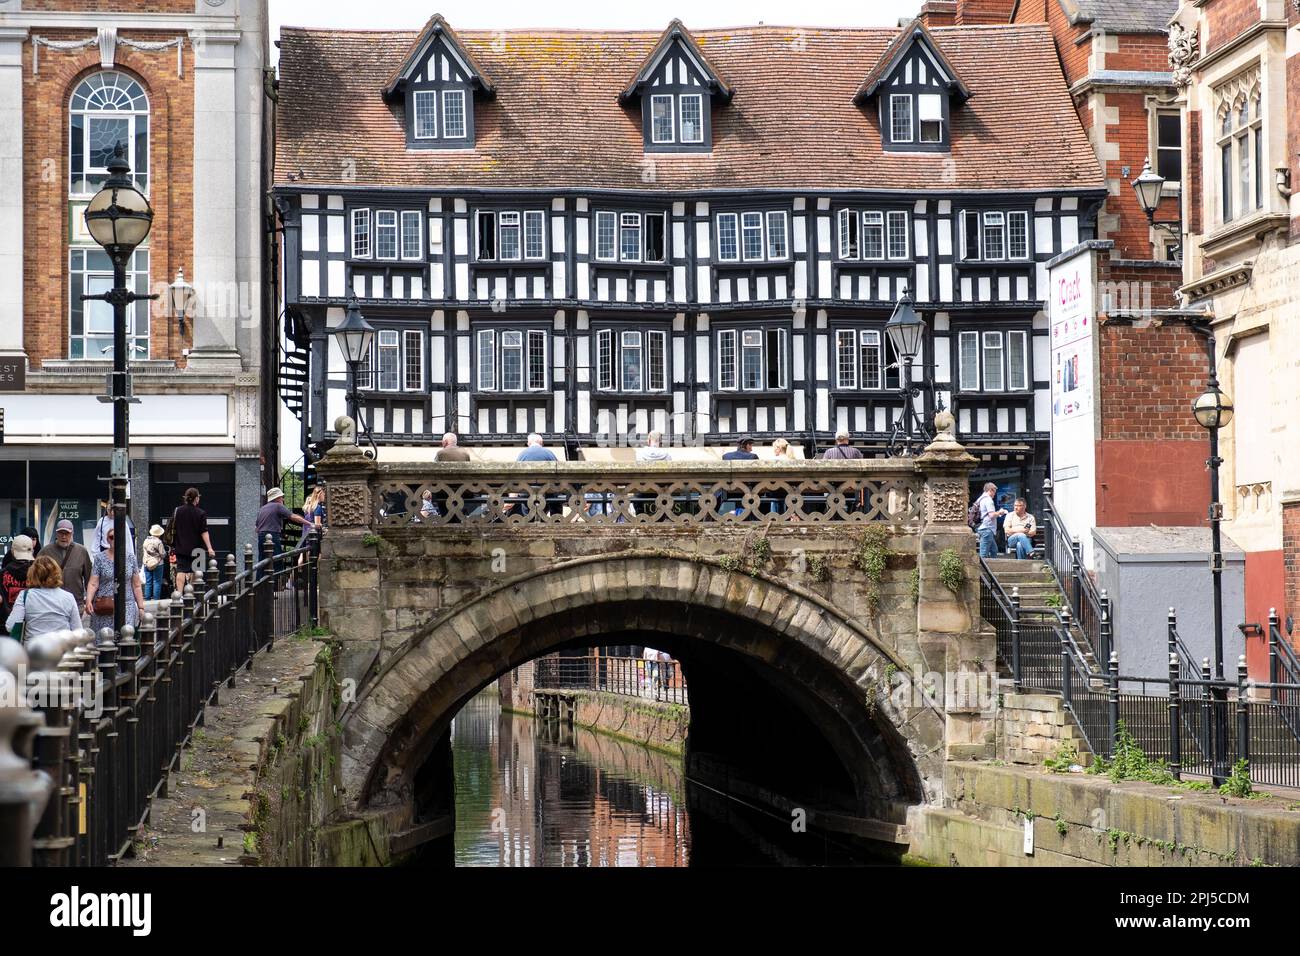 High Bridge across the River Witham in Lincoln City, England. Built in 1160, it It is the oldest bridge in the UK that still has buildings on it. Stock Photo